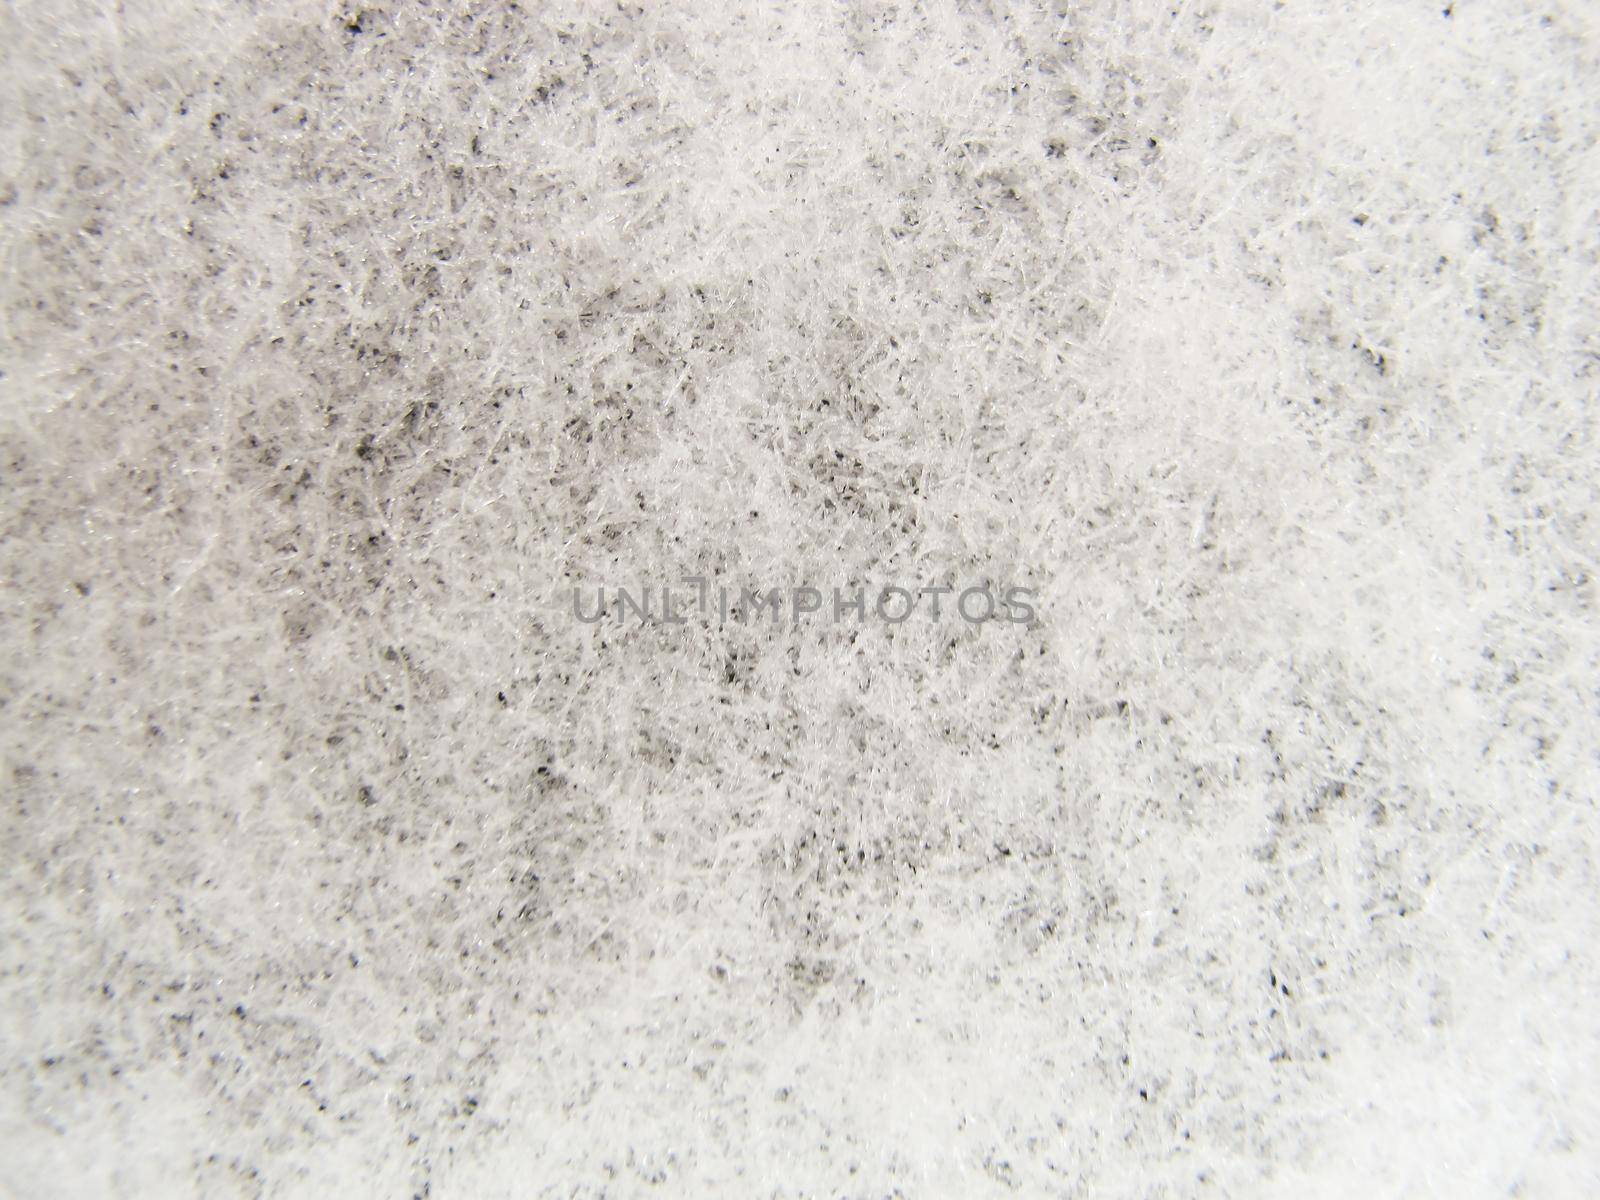 Background of fresh snow. Natural winter background. Snow texture in gray tone by Olayola